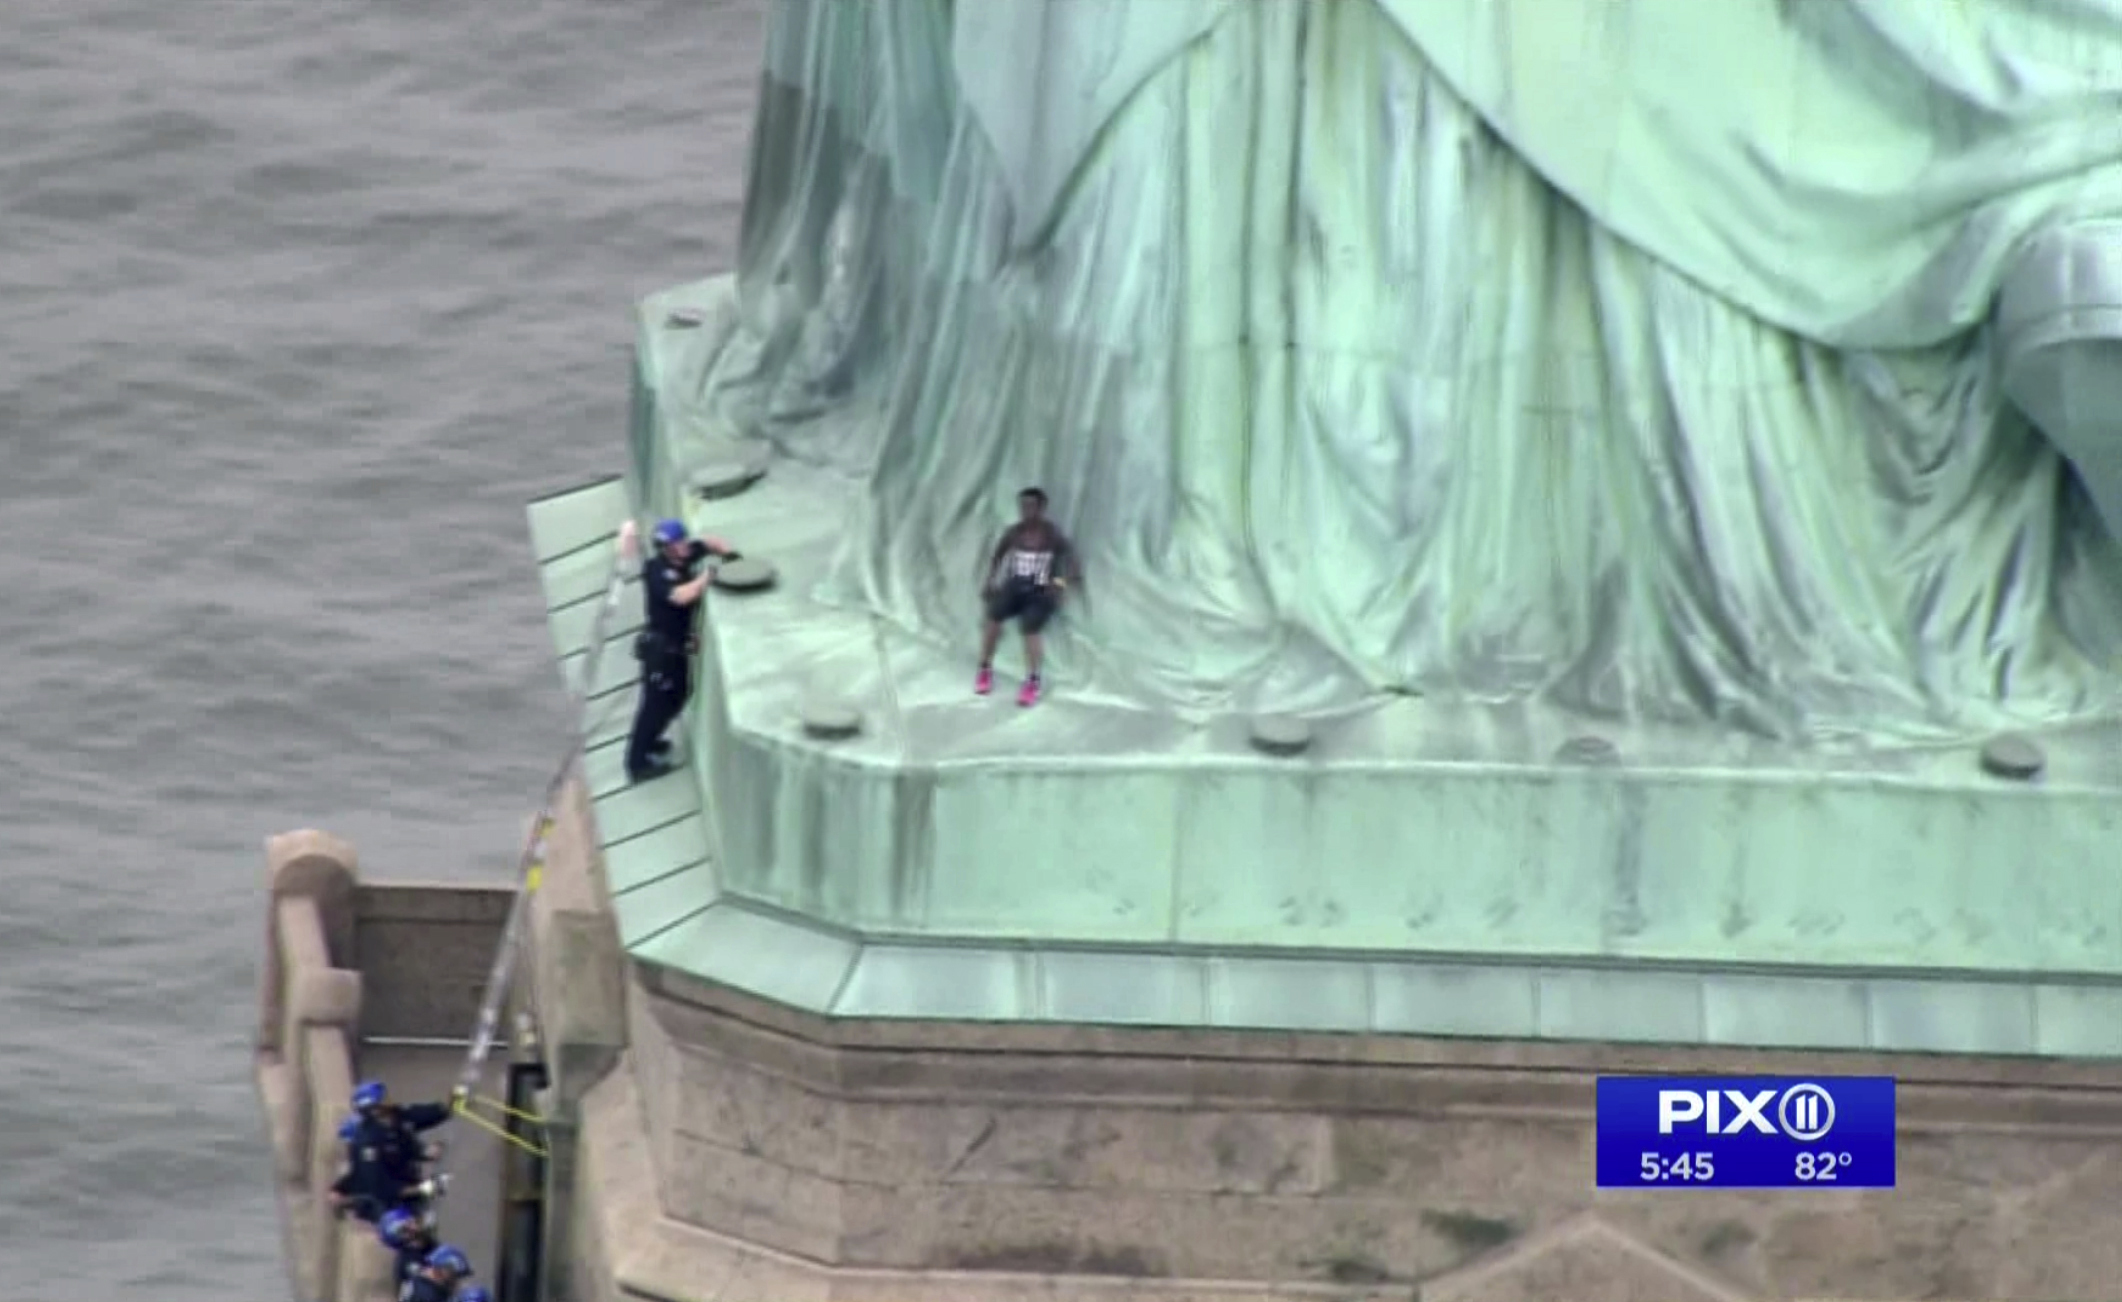 A protester at the base of the Statue of Liberty